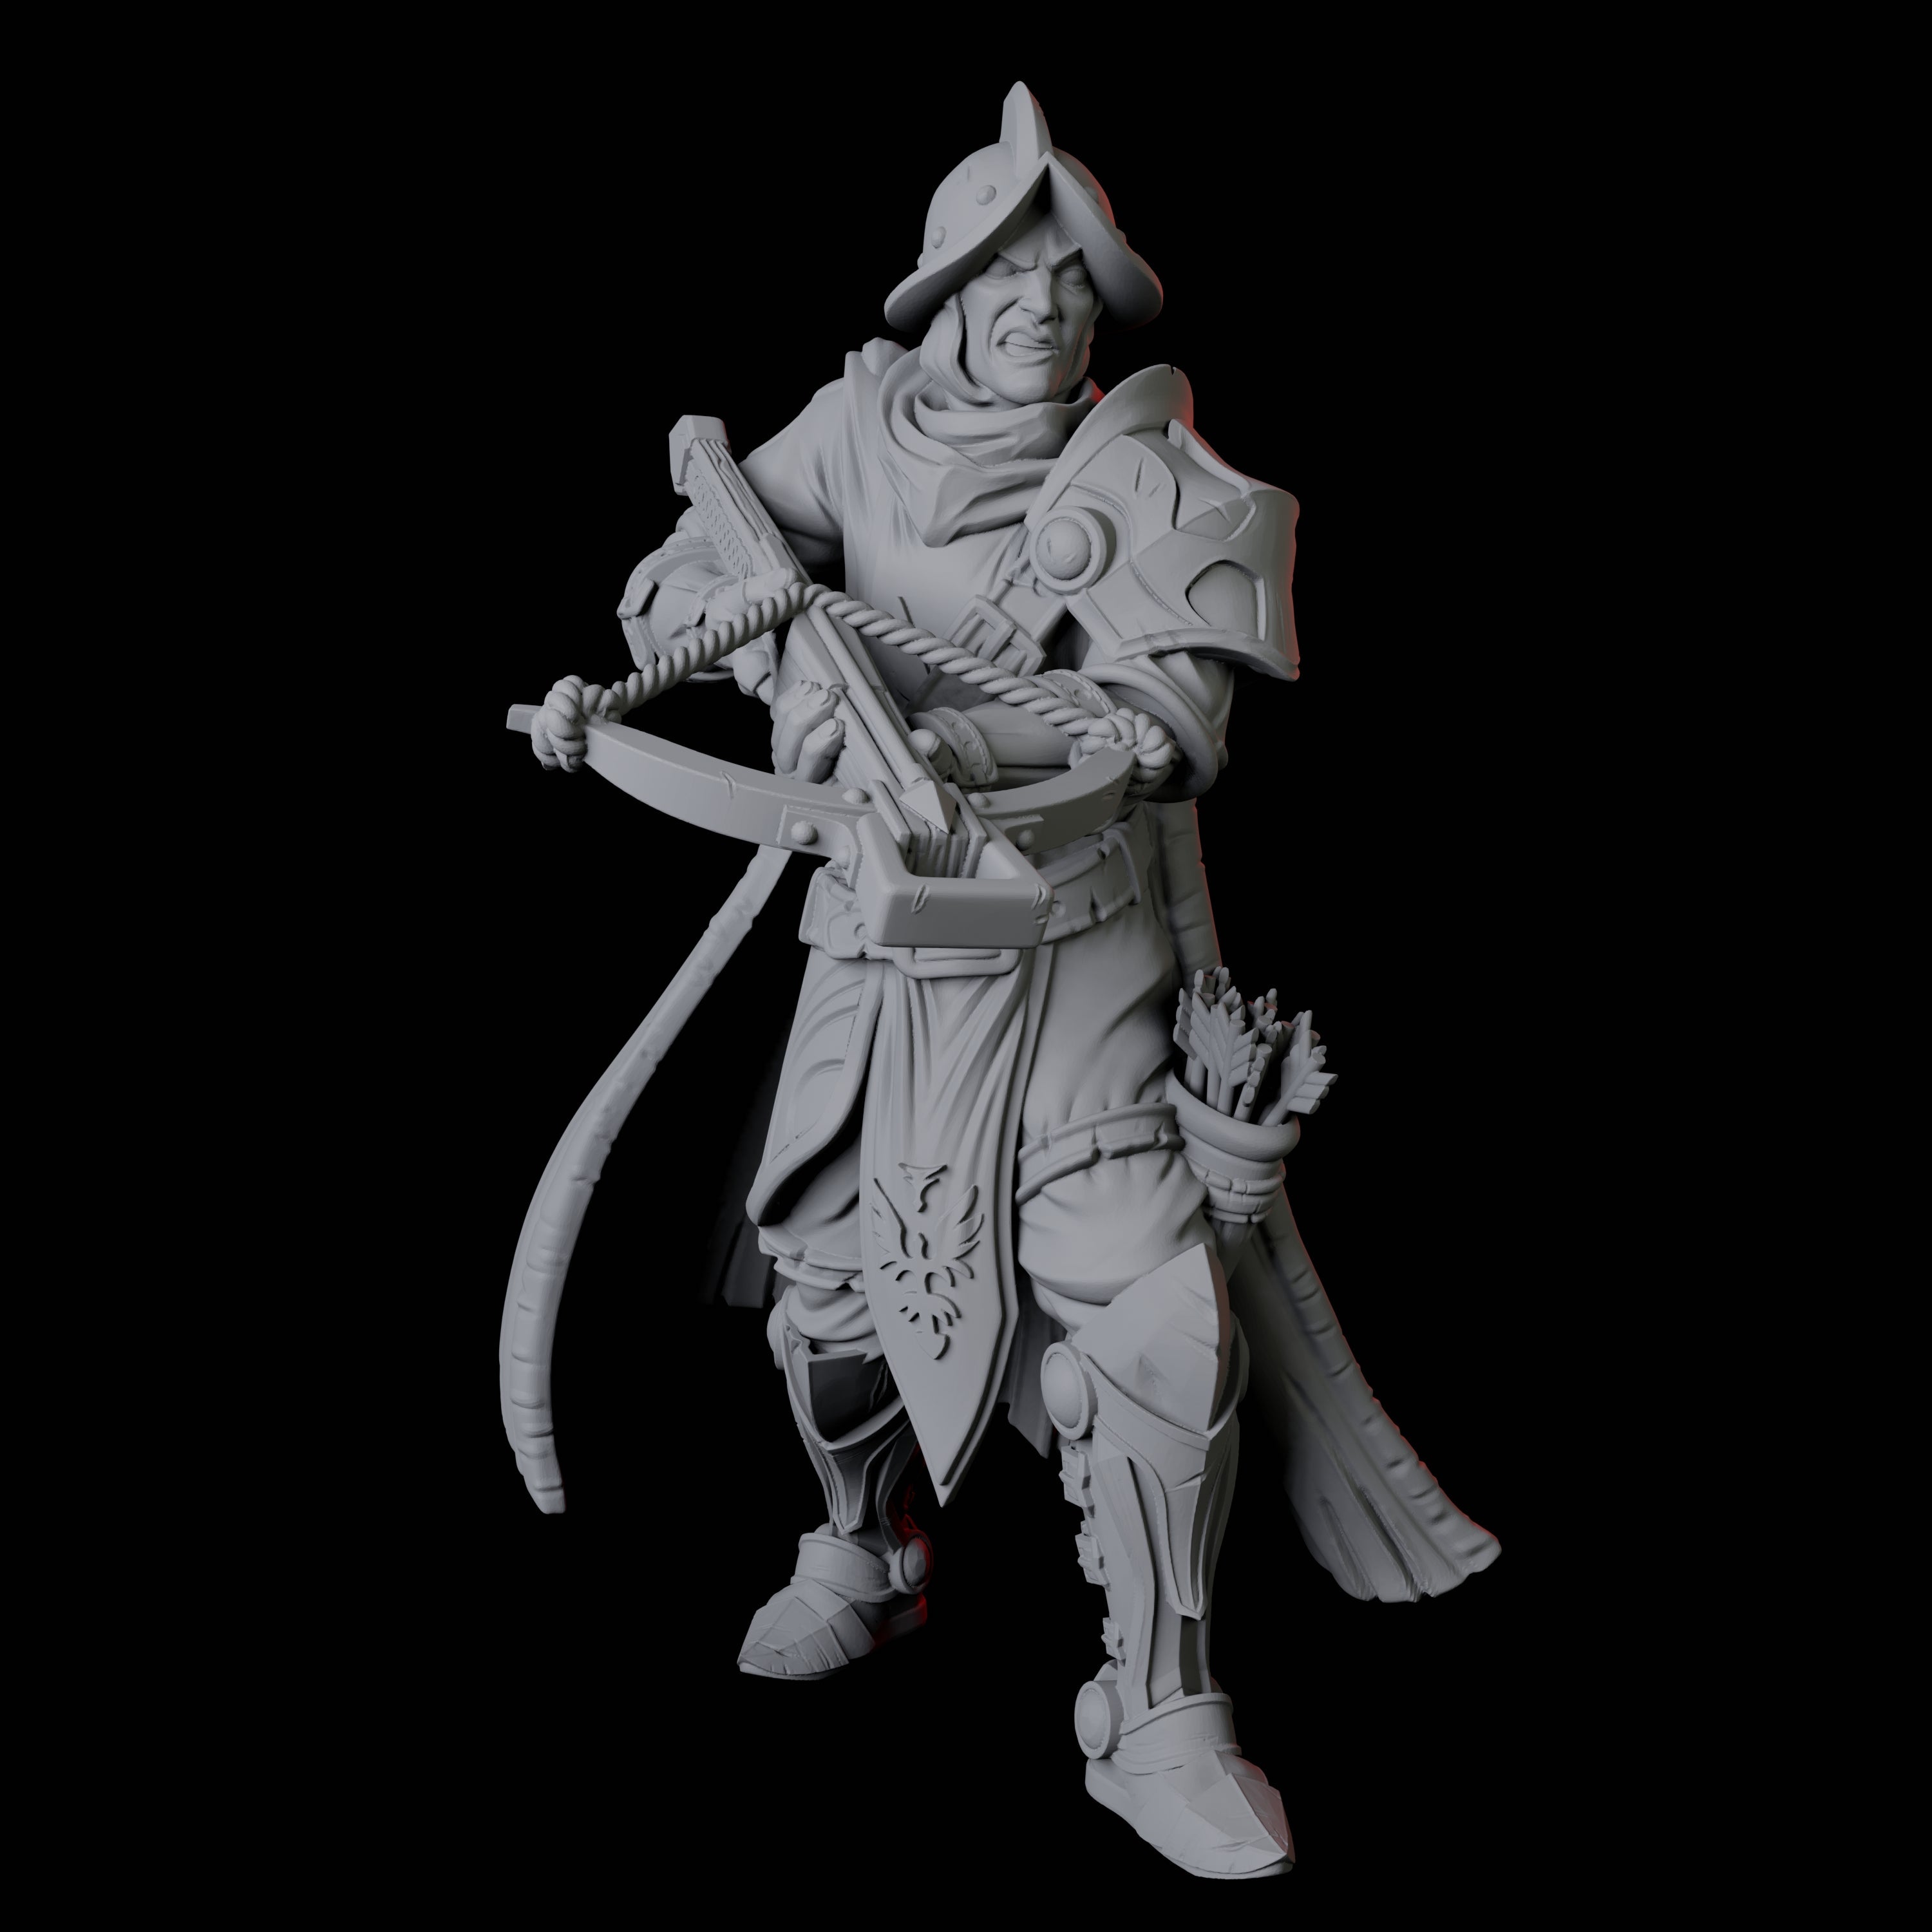 Three Arbalist Knights Miniature for Dungeons and Dragons, Pathfinder or other TTRPGs